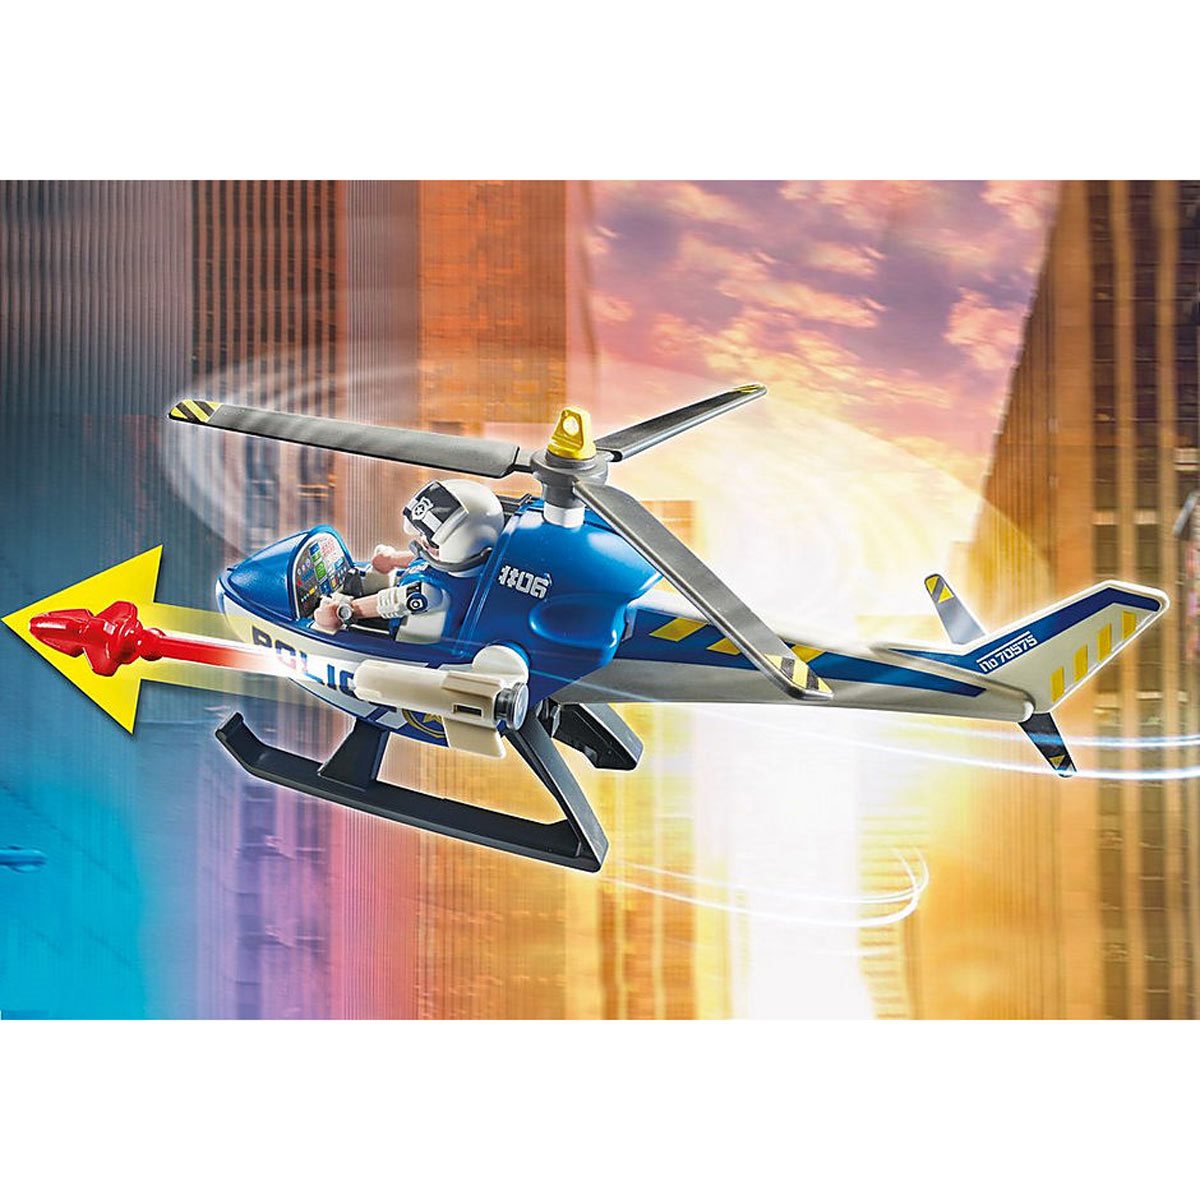 Playmobil City Action Police Helicopter Pursuit with Runaway Van (70575)